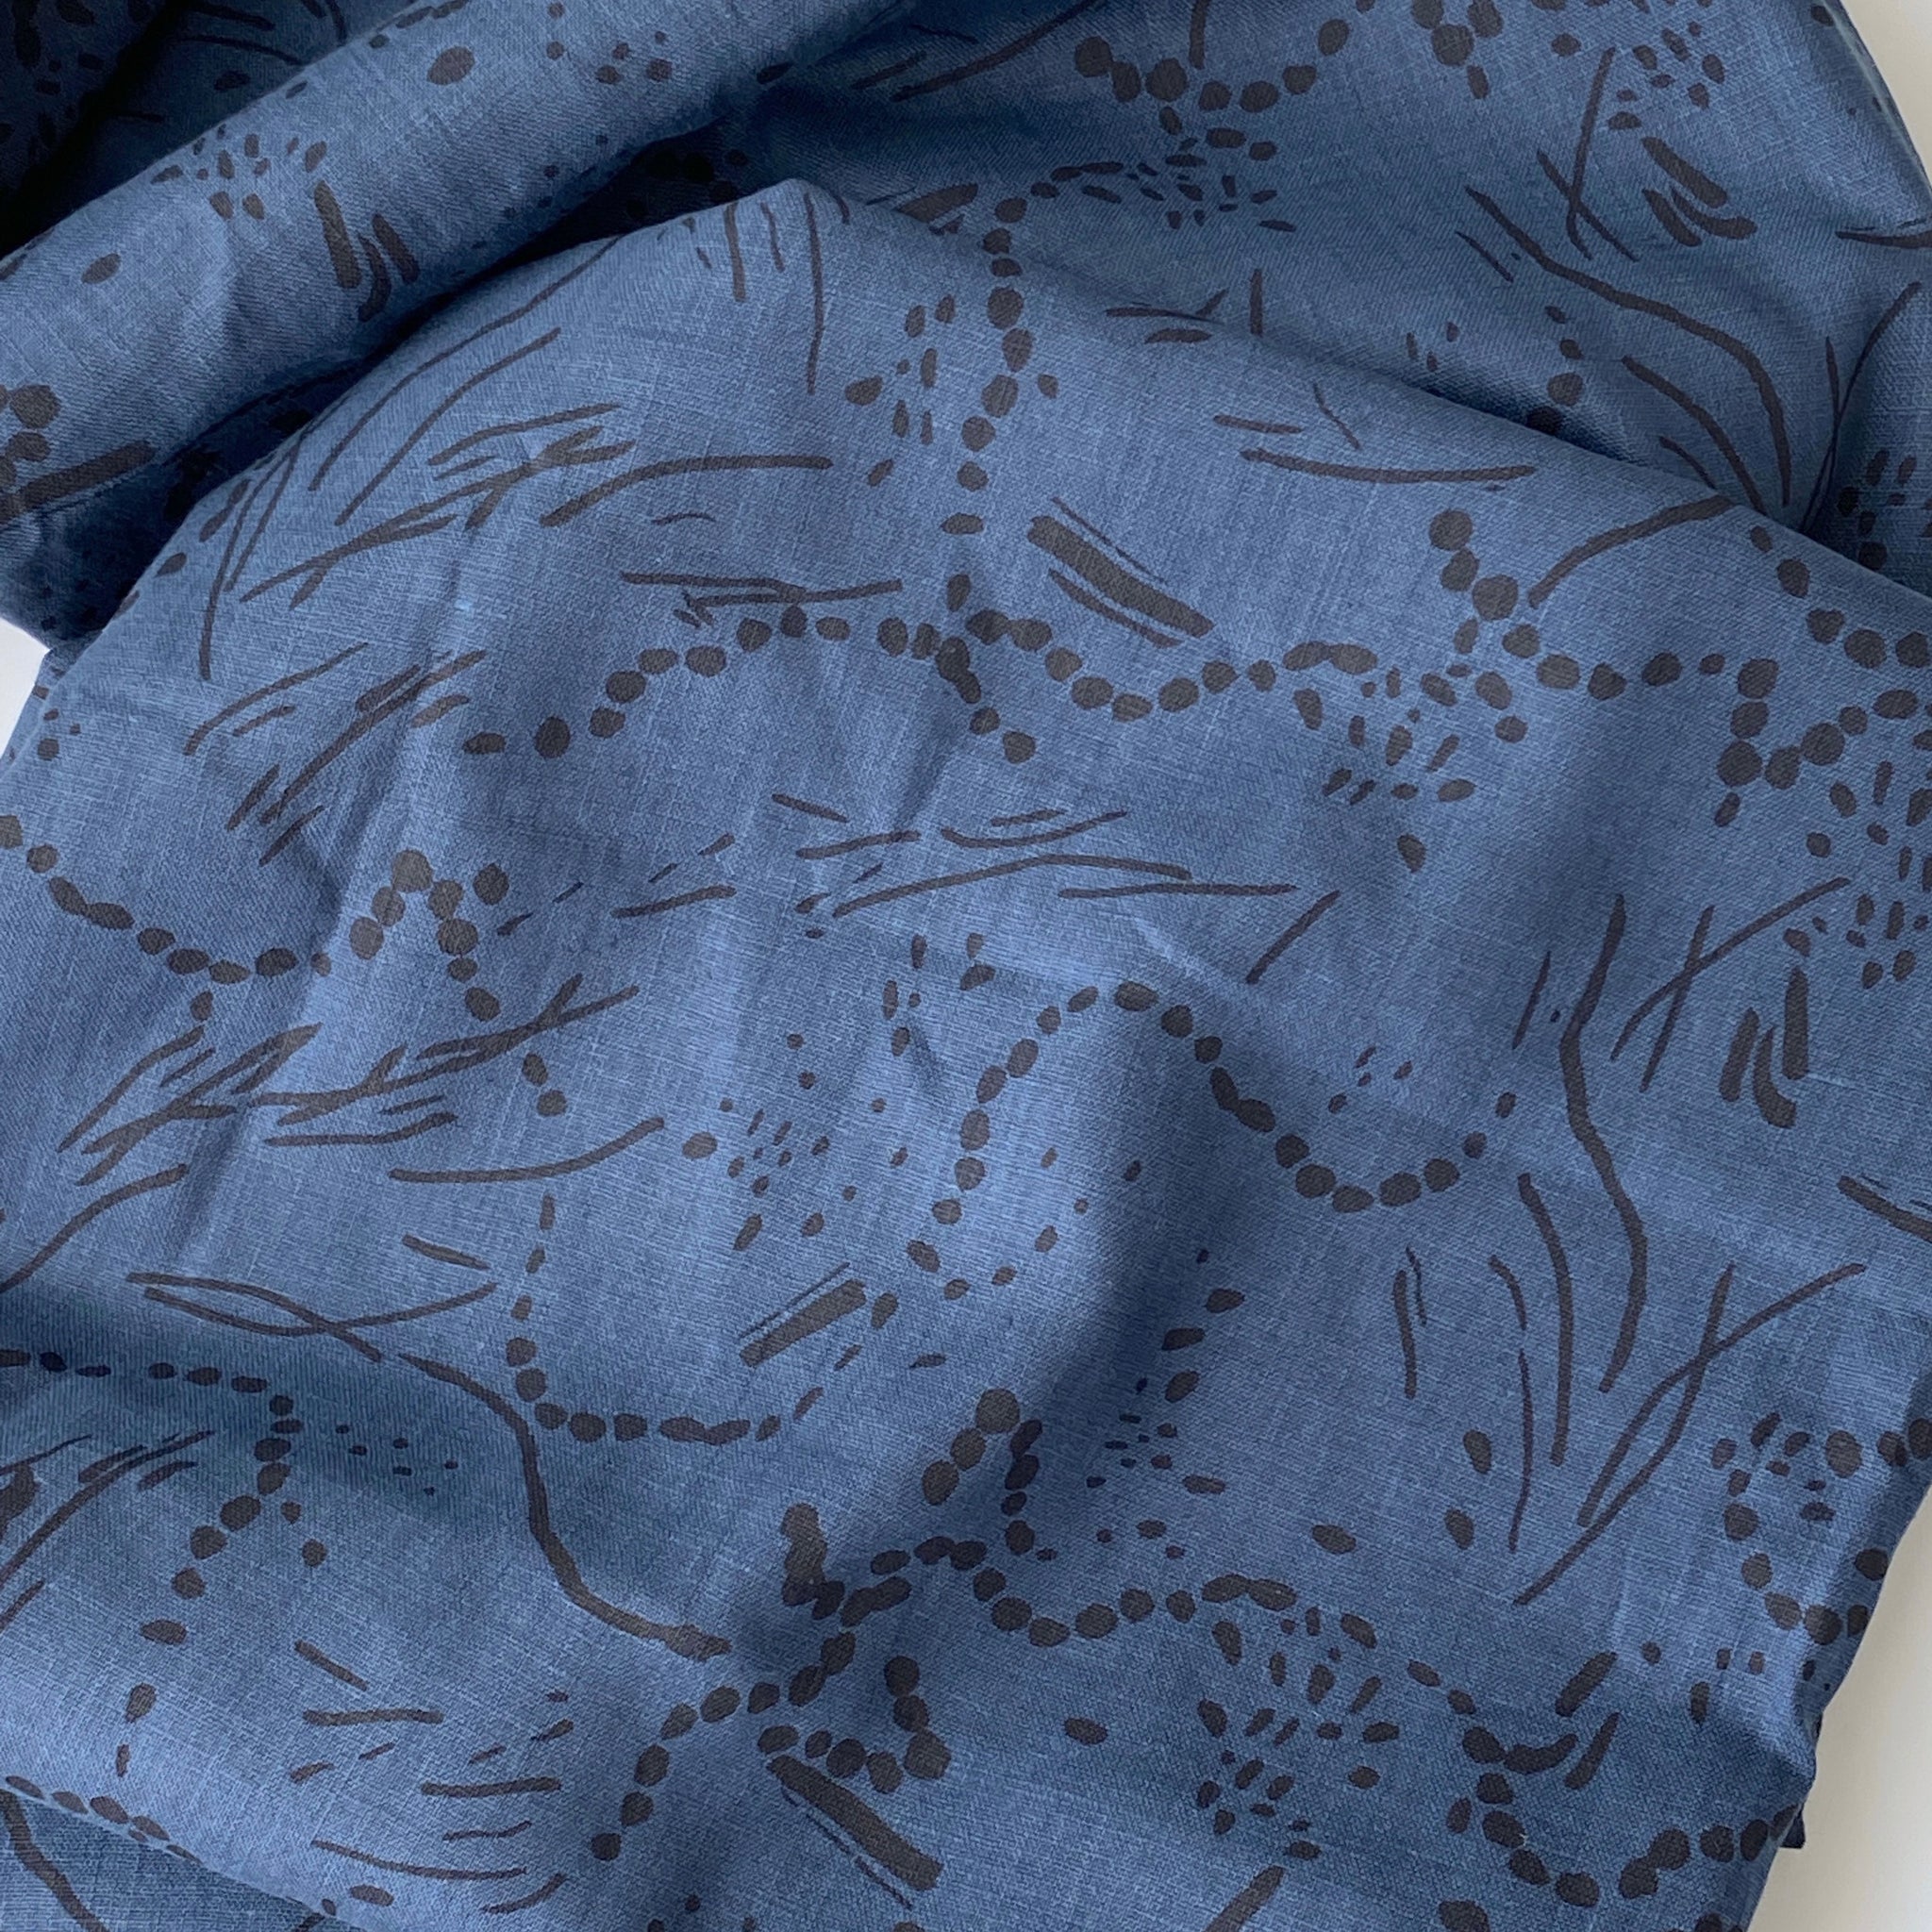 Drape in Midnight on Deep Blue - 100% linen - FABRIC BY THE YARD